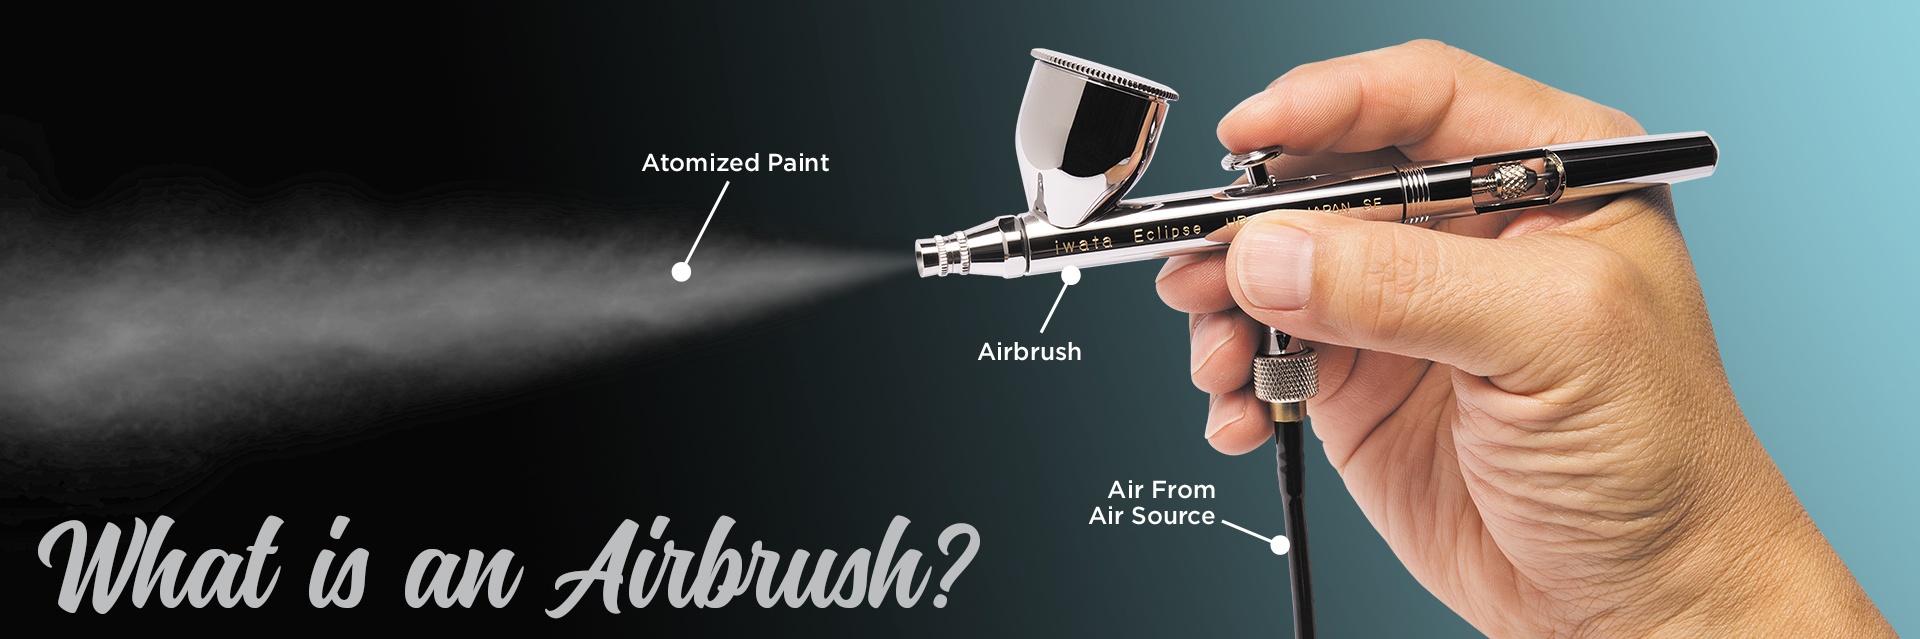 Herziening Sada Acteur New to Airbrush? Here's a Simple Guide to the Basics